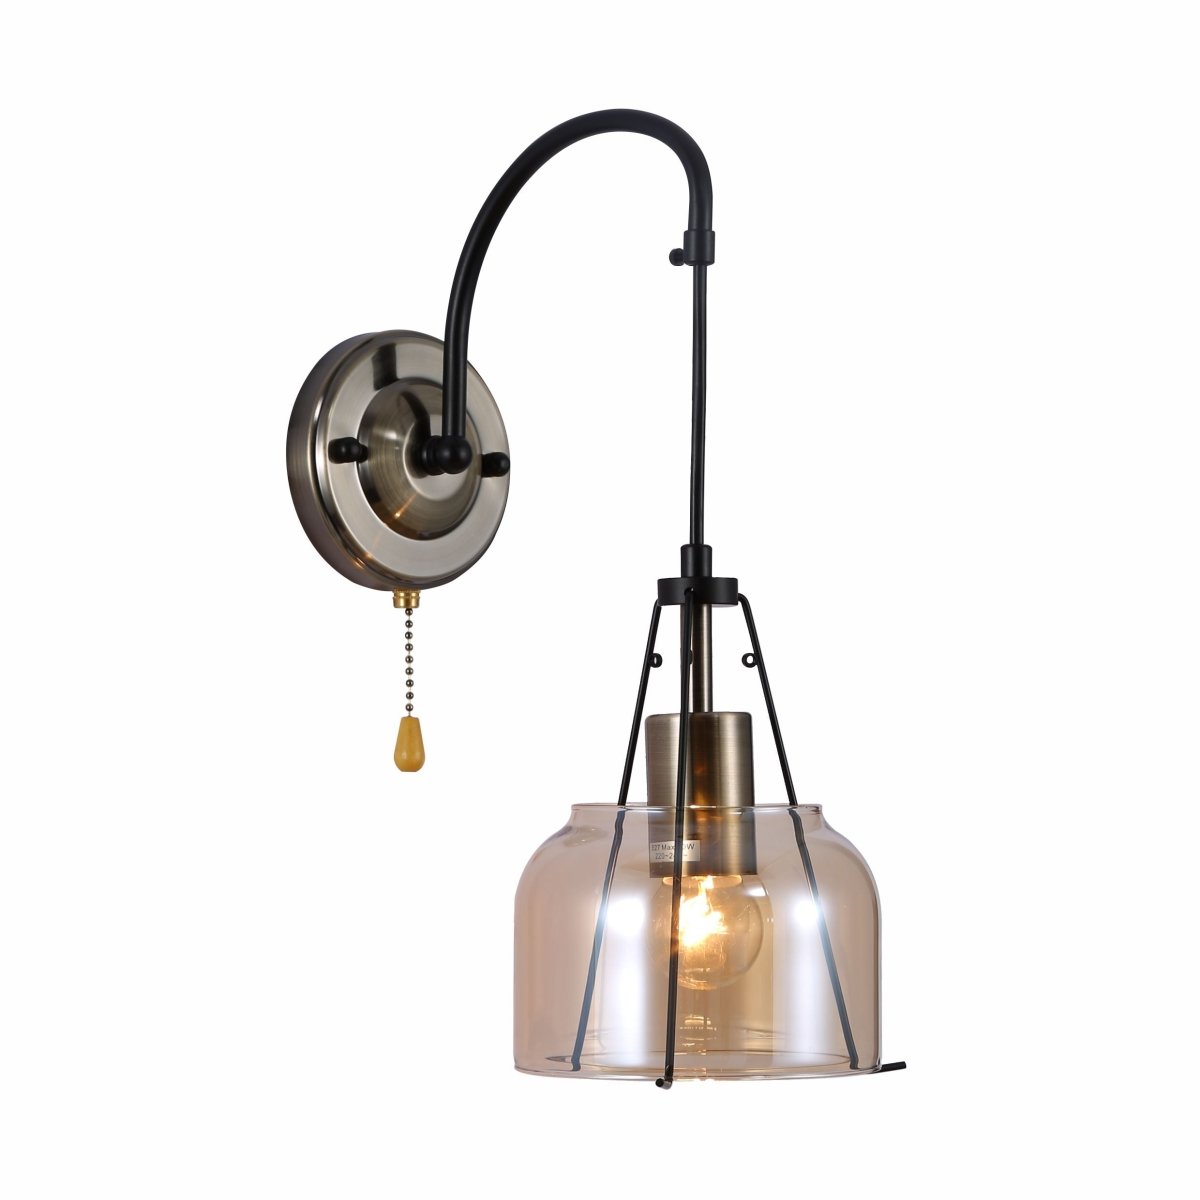 Amber Glass Pendant Wall Light E27 And Pull Down Switch's main image.